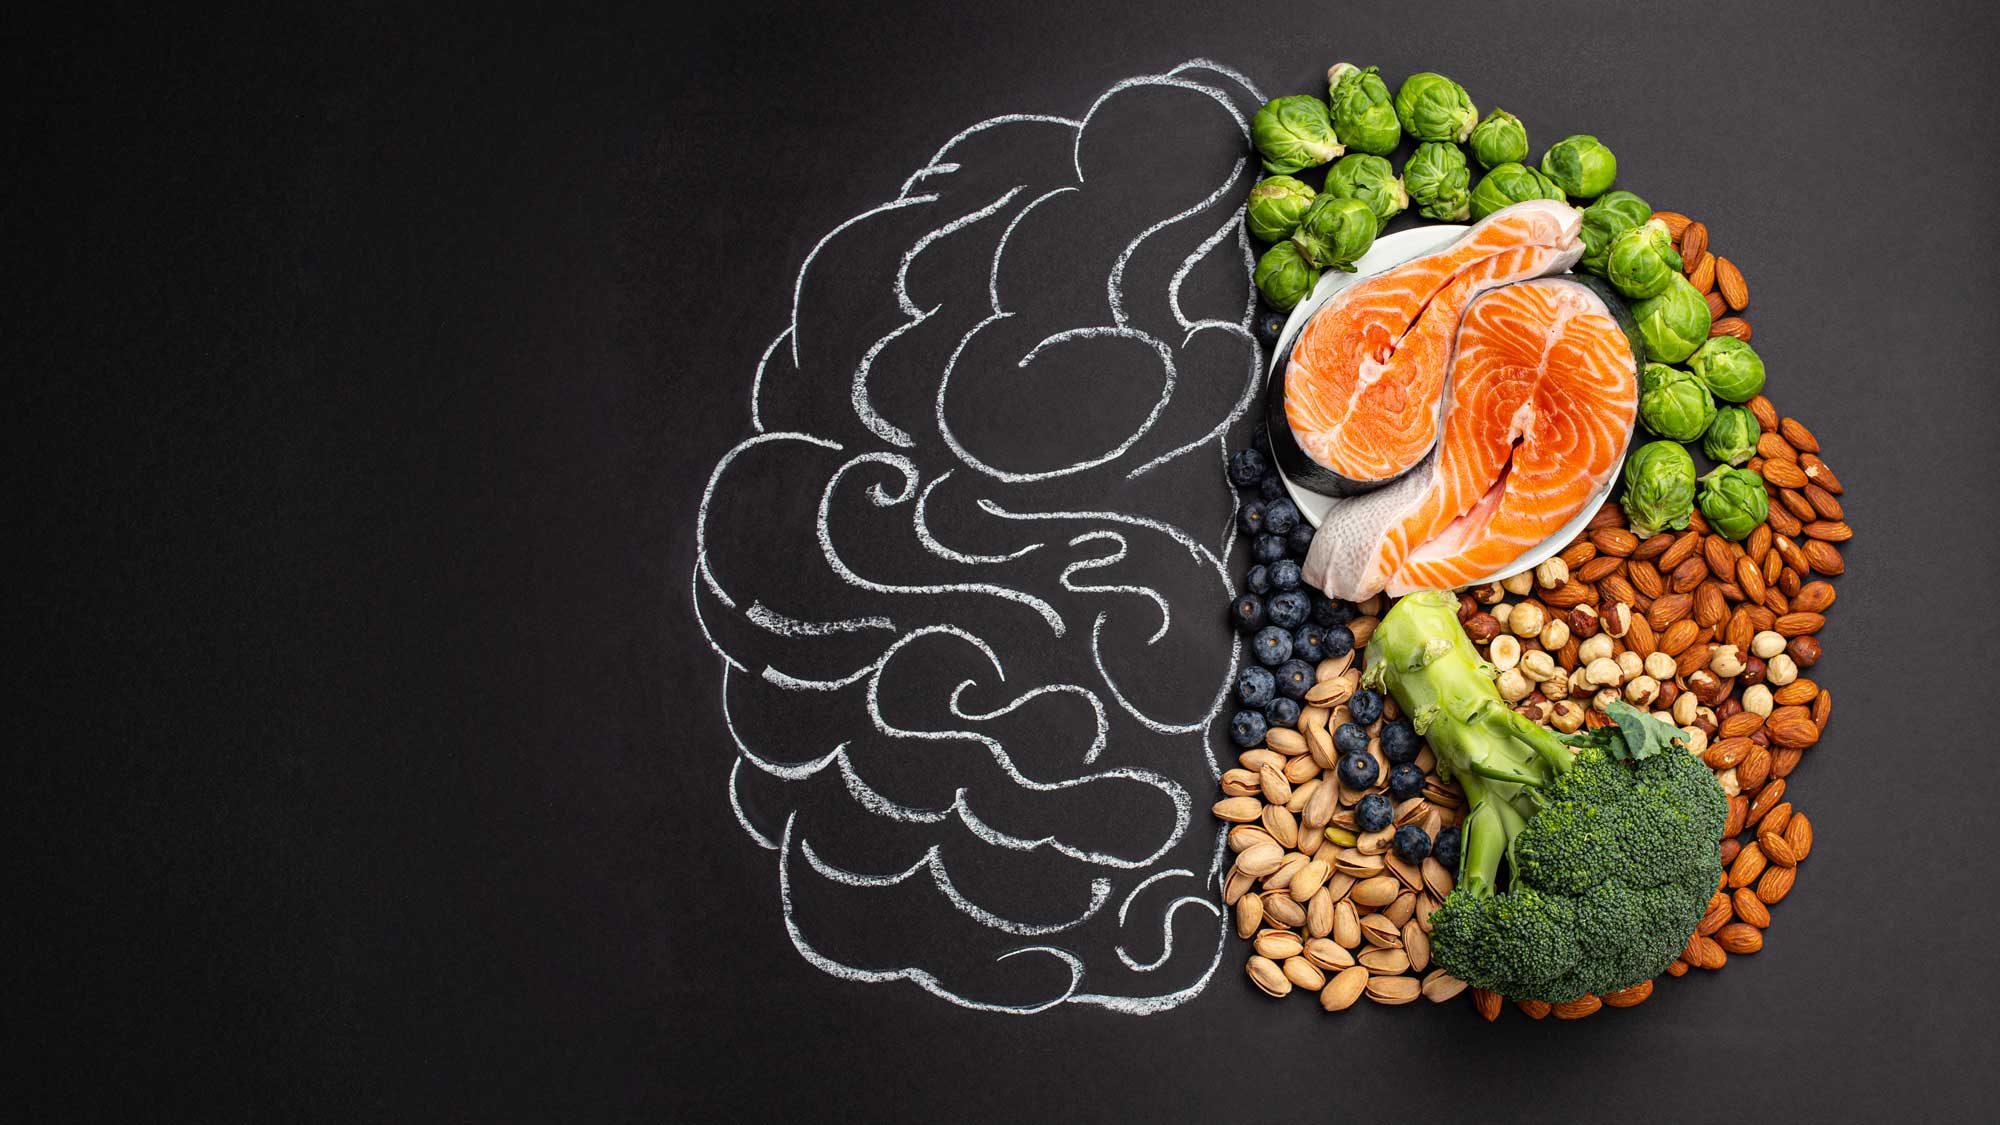 depiction of a brain with half drawn in chalk and the other comprised of vegetables, nuts, and berries